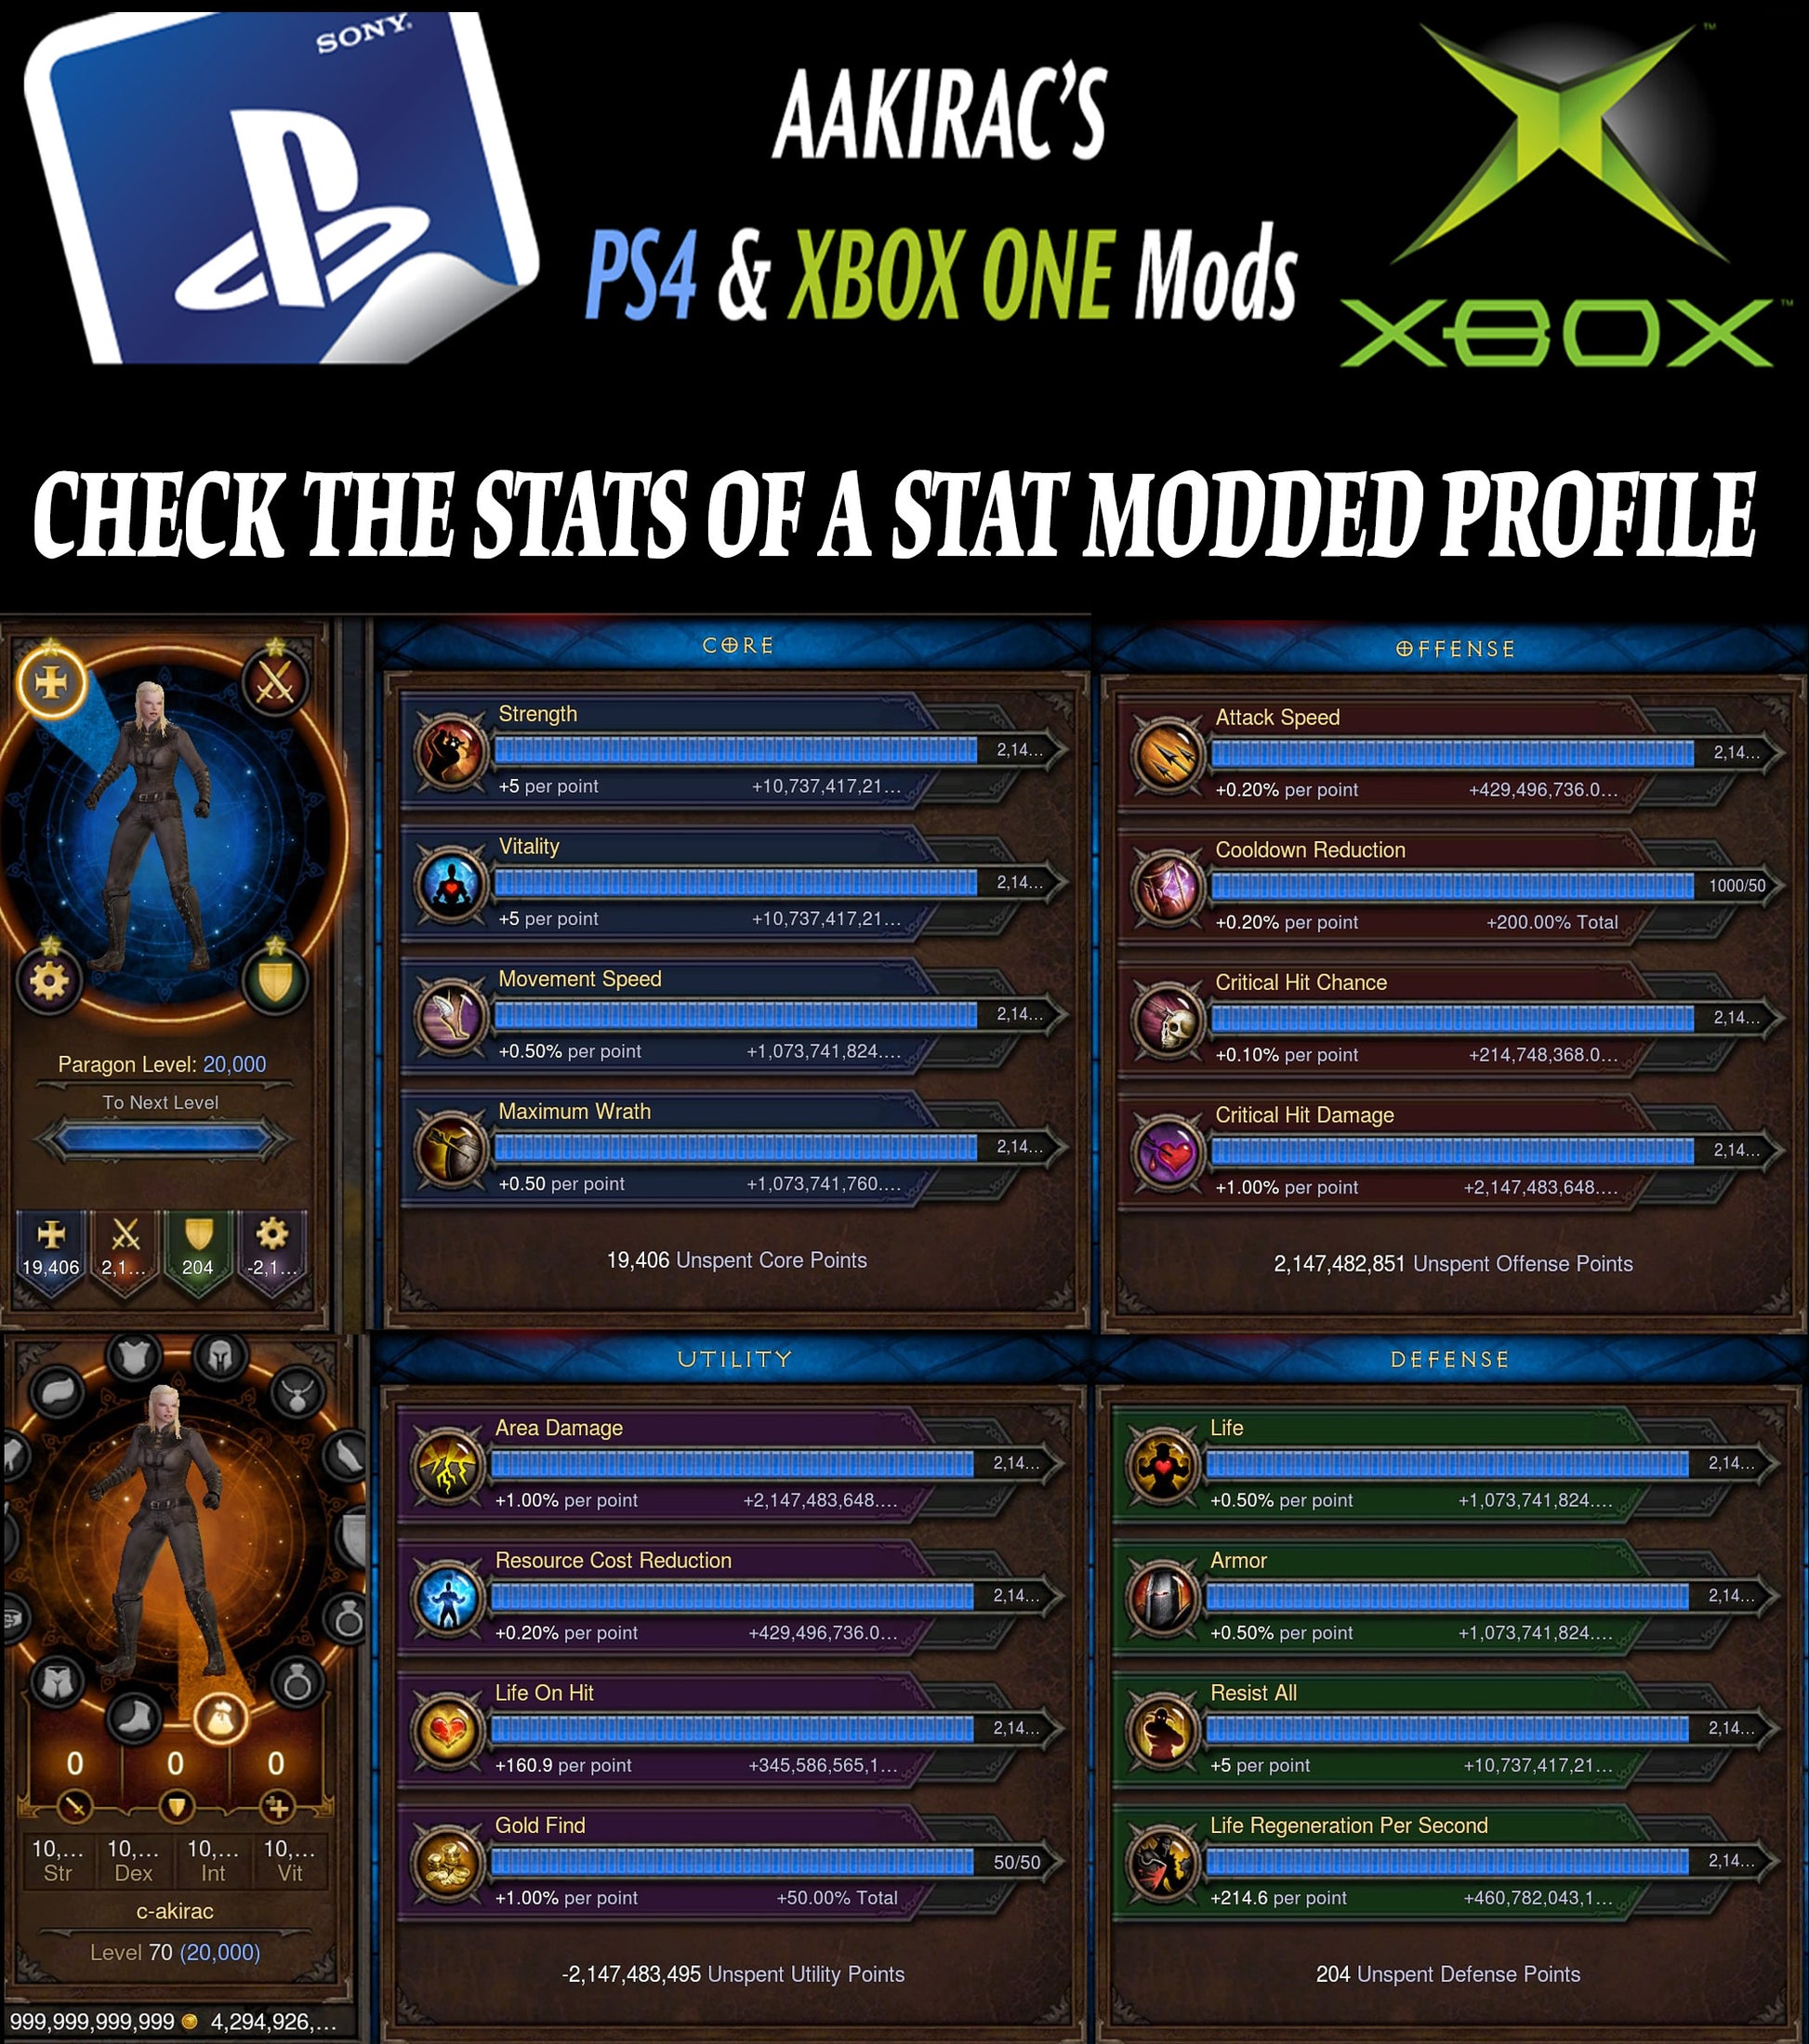 14x EXTREME Stat Modded Characters + Necromancer Stat Mod Diablo 3 Mods ROS Seasonal and Non Seasonal Save Mod - Modded Items and Gear - Hacks - Cheats - Trainers for Playstation 4 - Playstation 5 - Nintendo Switch - Xbox One